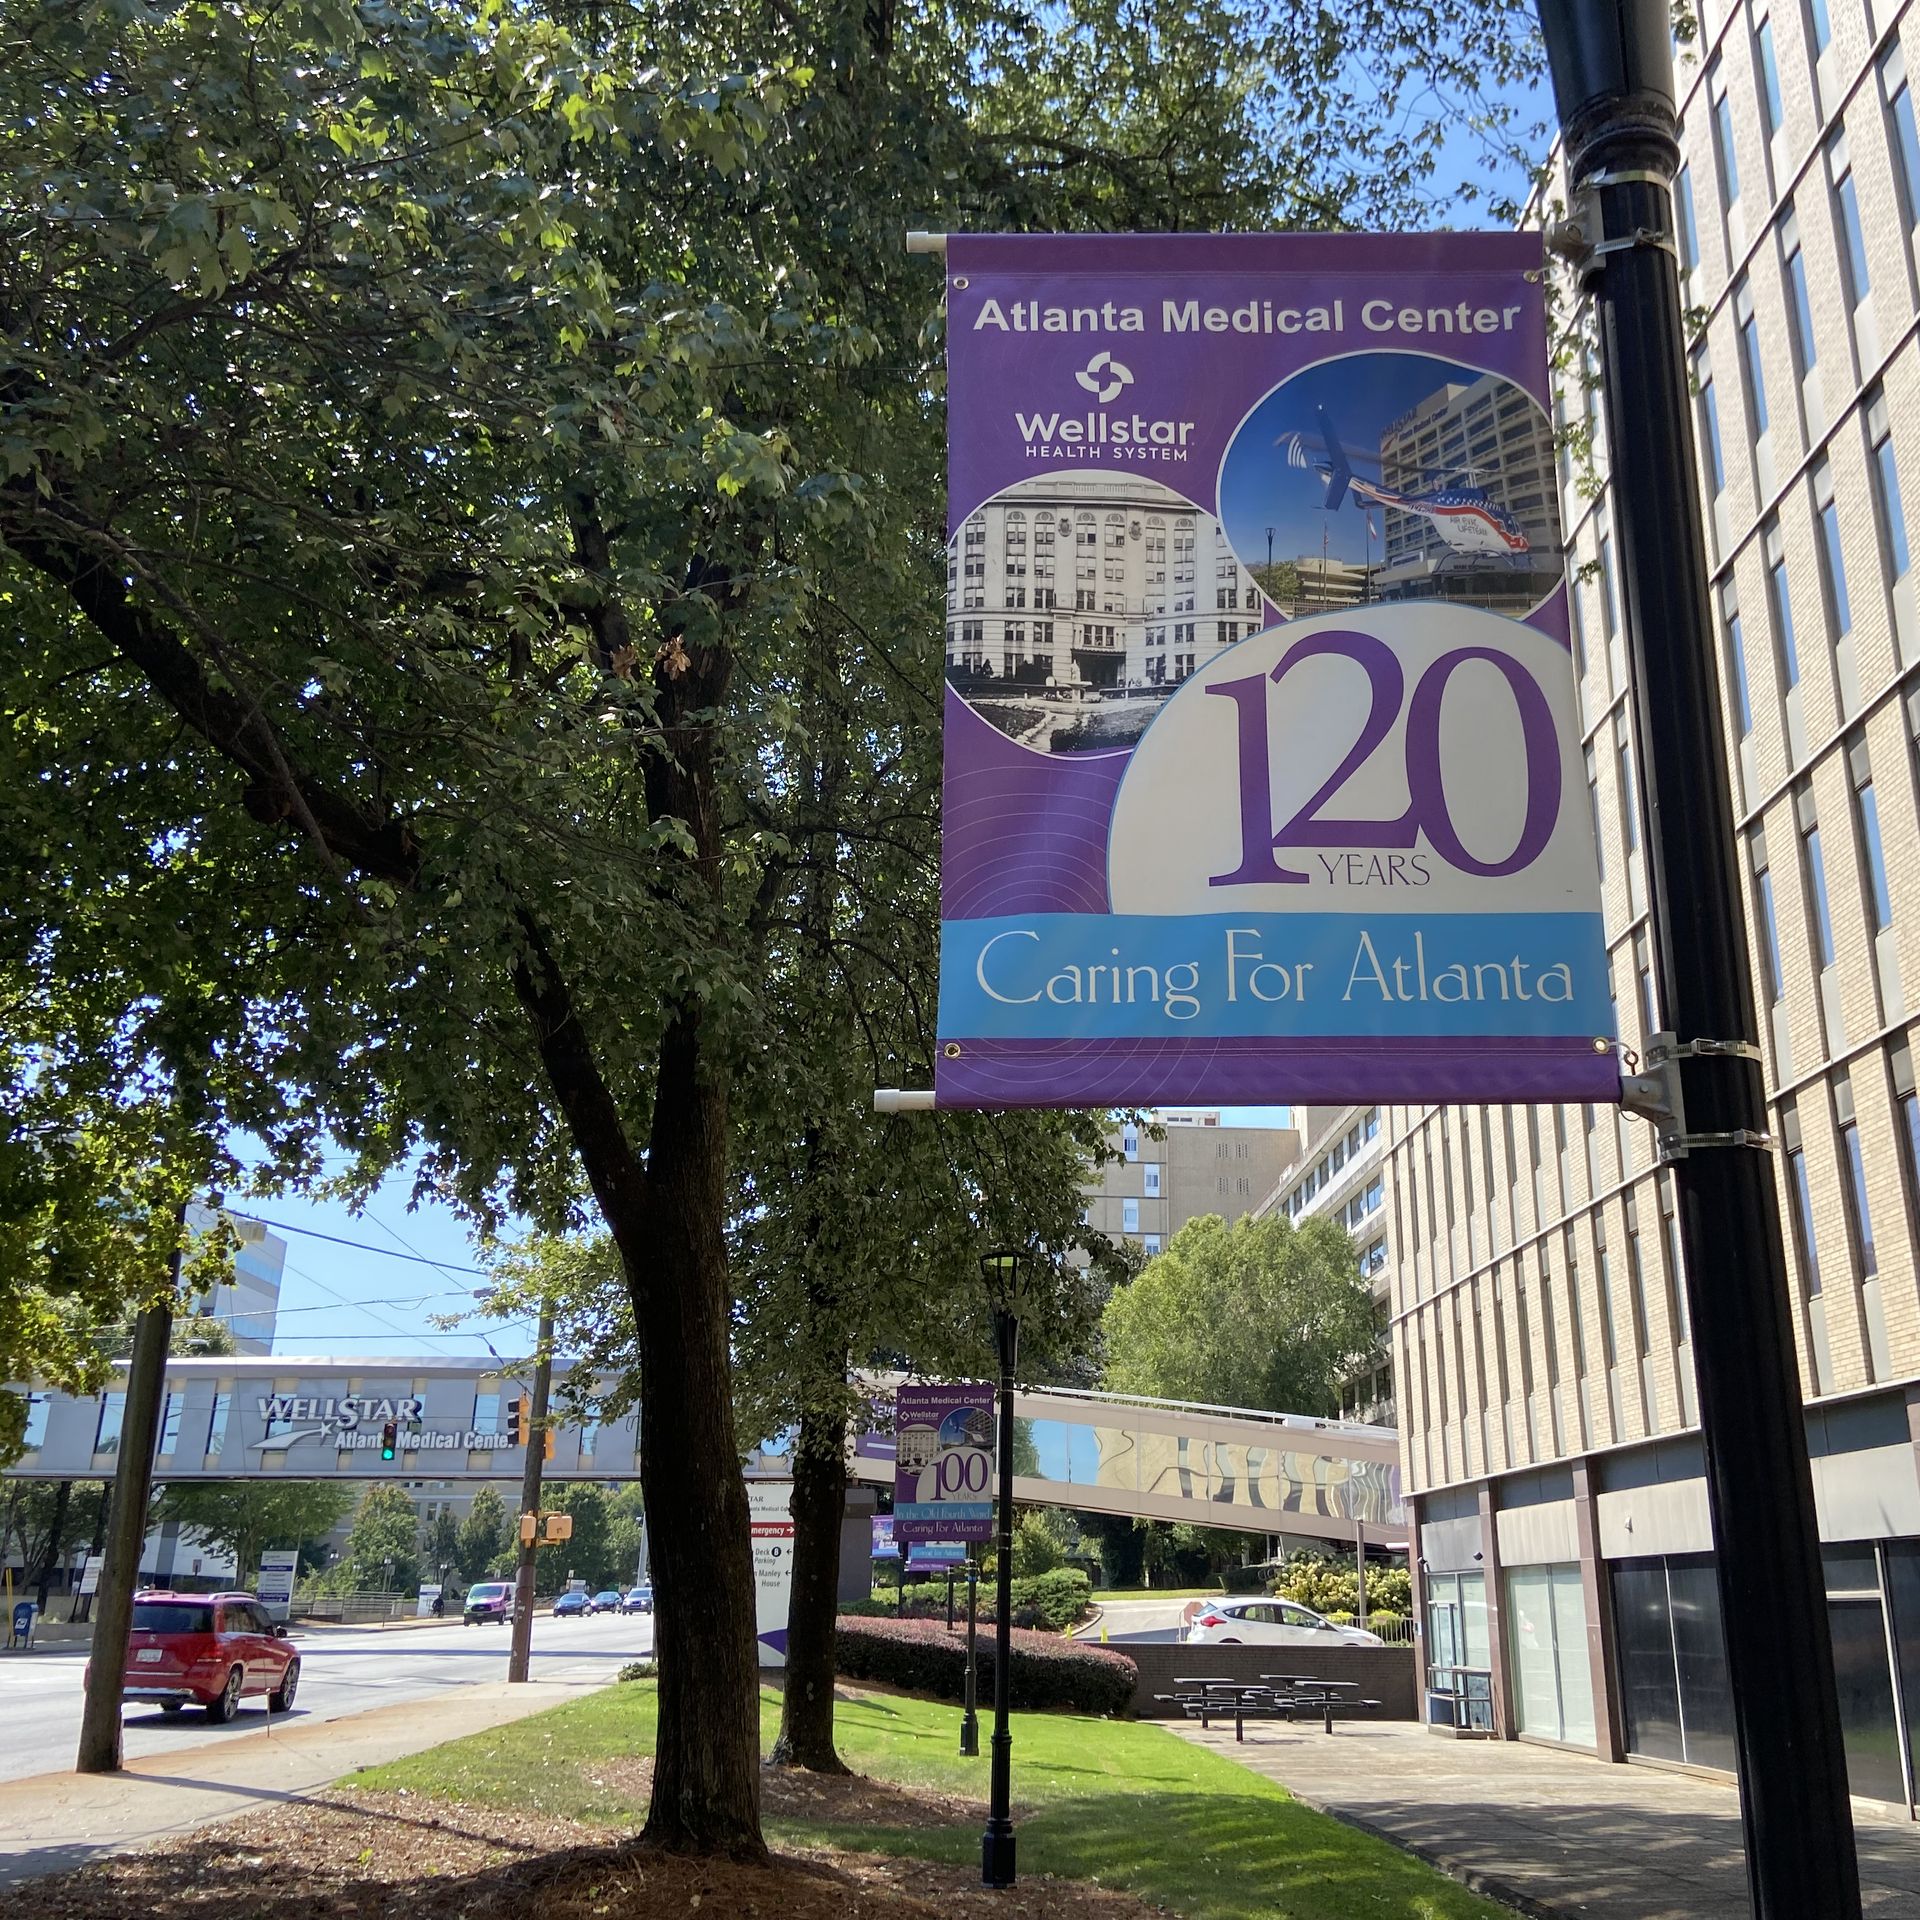 SIgn saying 120 years of caring for Atlanta outside a hospital